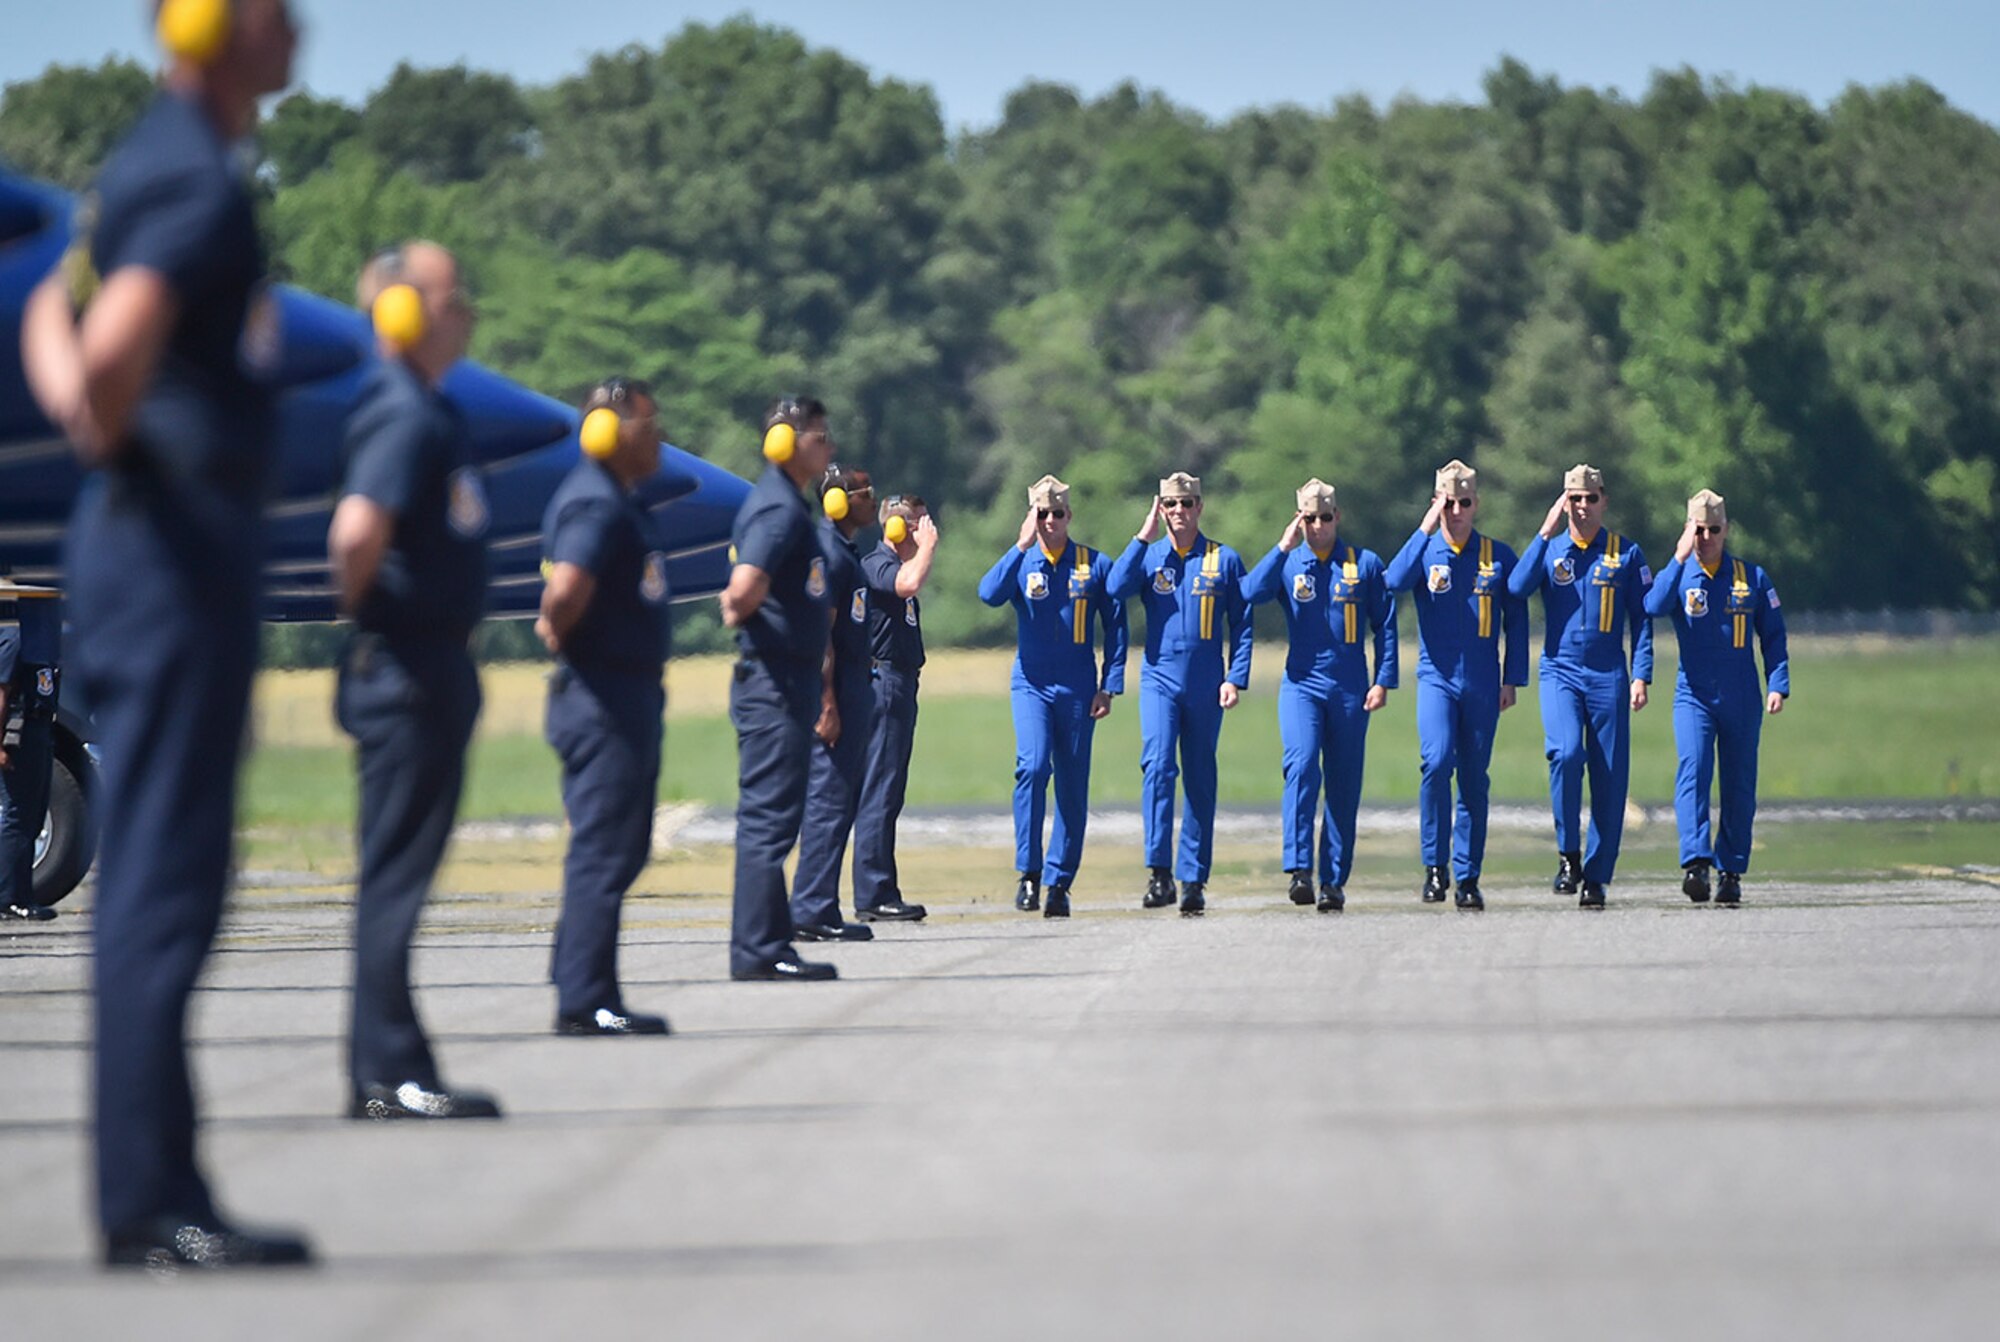 The U.S. Navy's Blue Angels pilots march six abreast as they greet their crew chiefs prior to getting in their jets.  The Blue Angels are the Navy's premiere aerial demonstration team performing at air shows around the world.